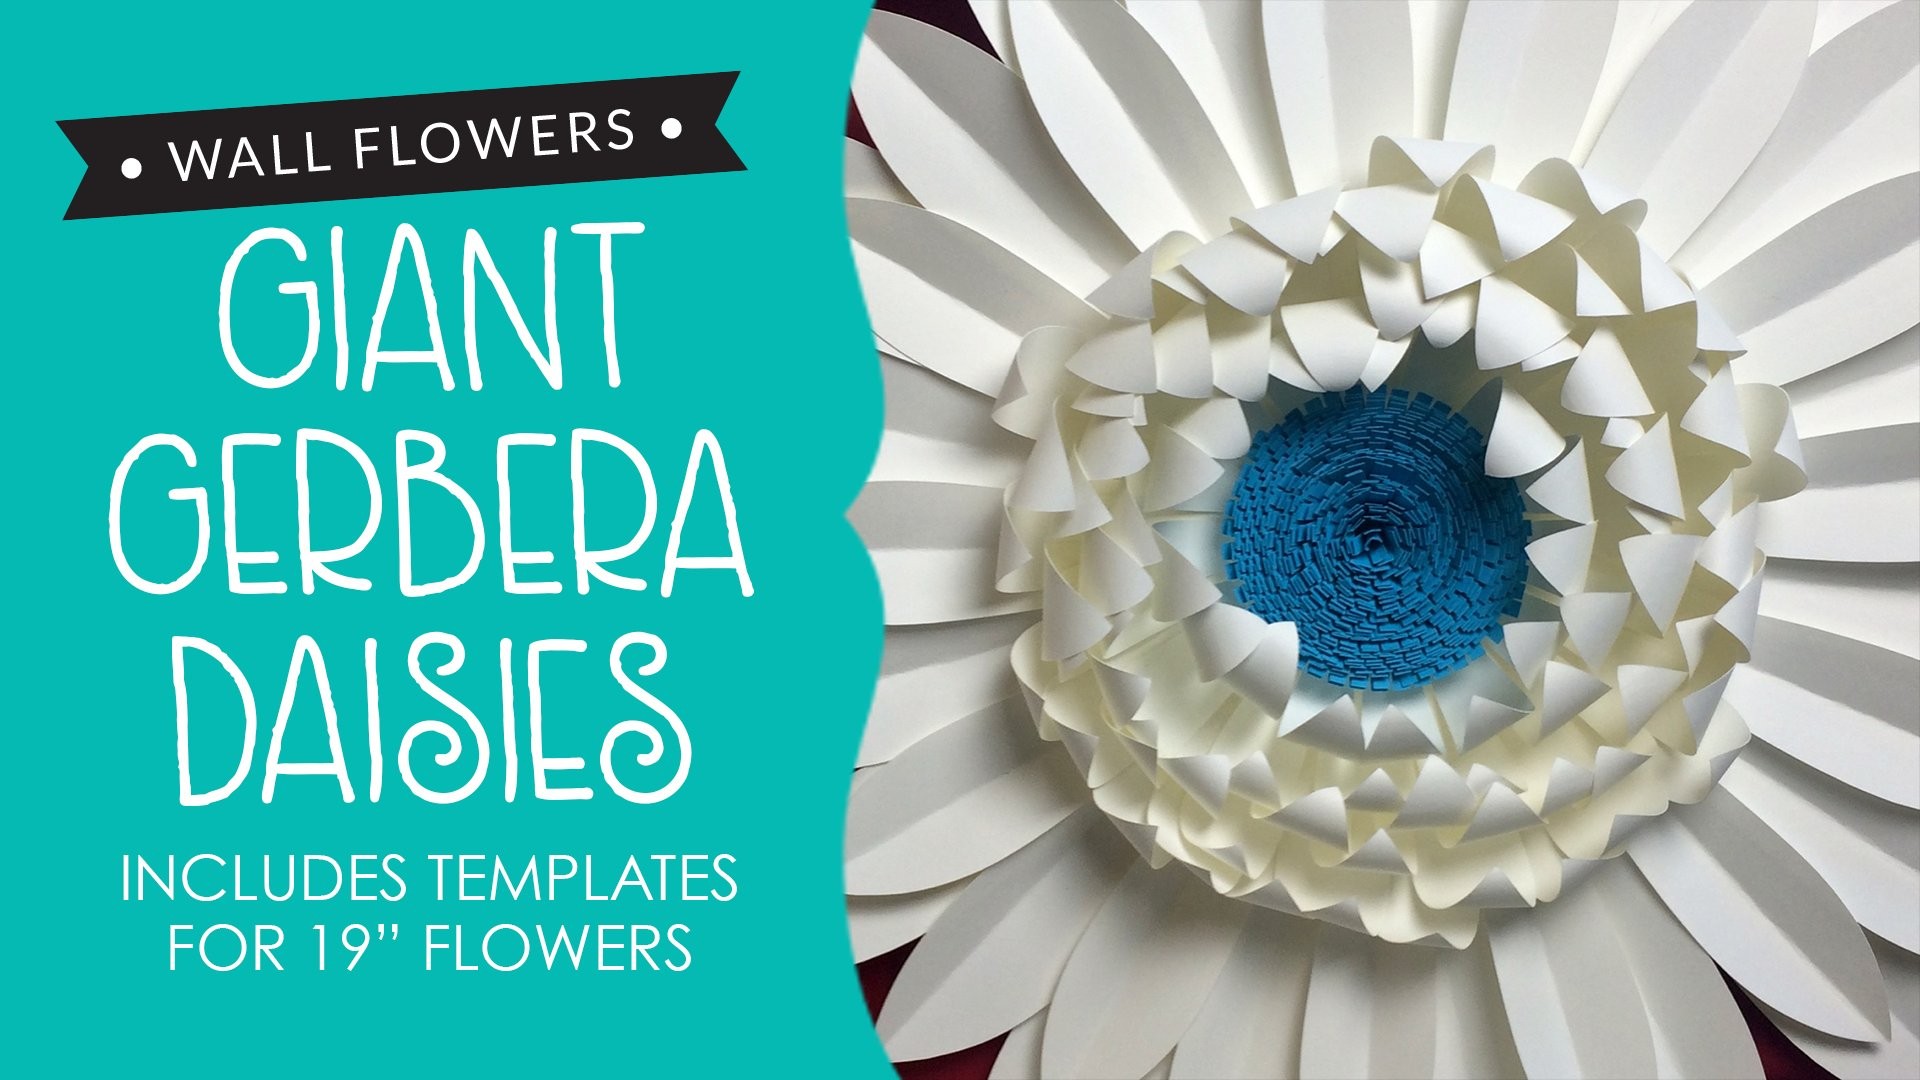 Wall Flowers Giant Gerbera Daisies Includes Templates Heather Daisy Template